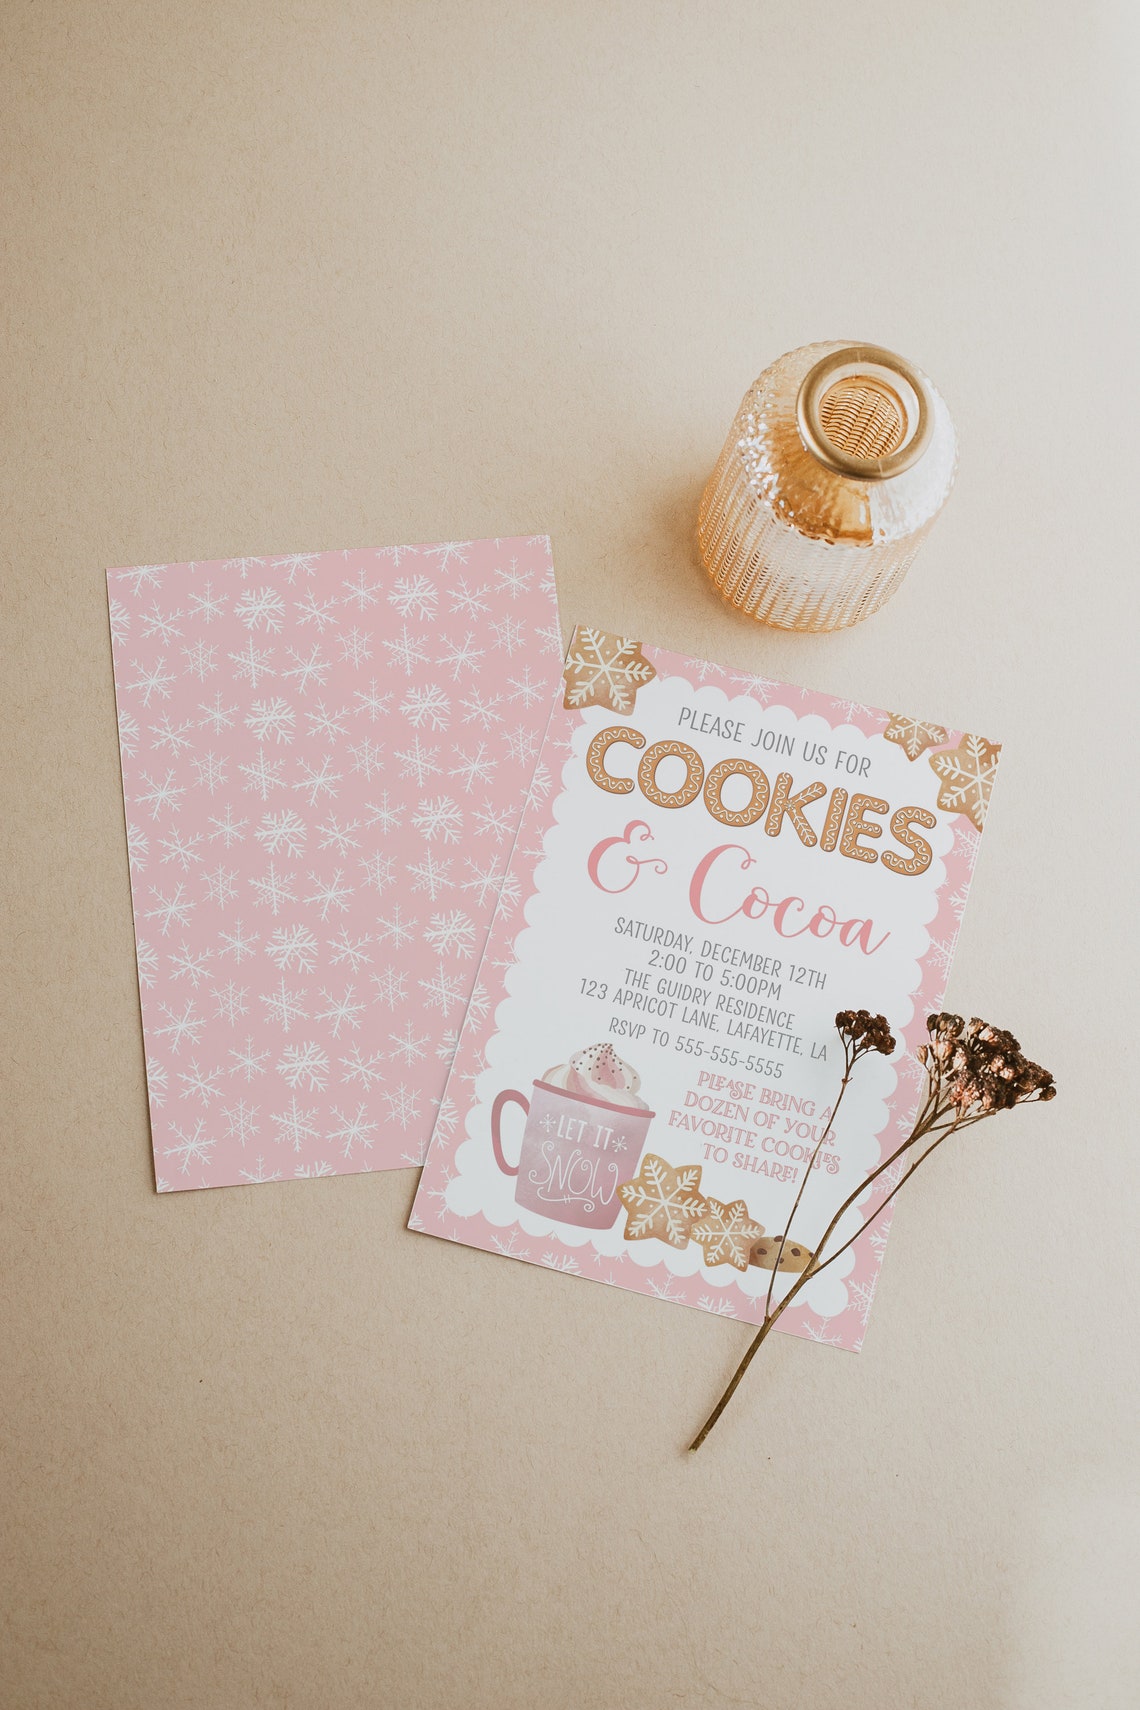 cookies-and-cocoa-birthday-invitation-cookies-and-cocoa-birthday